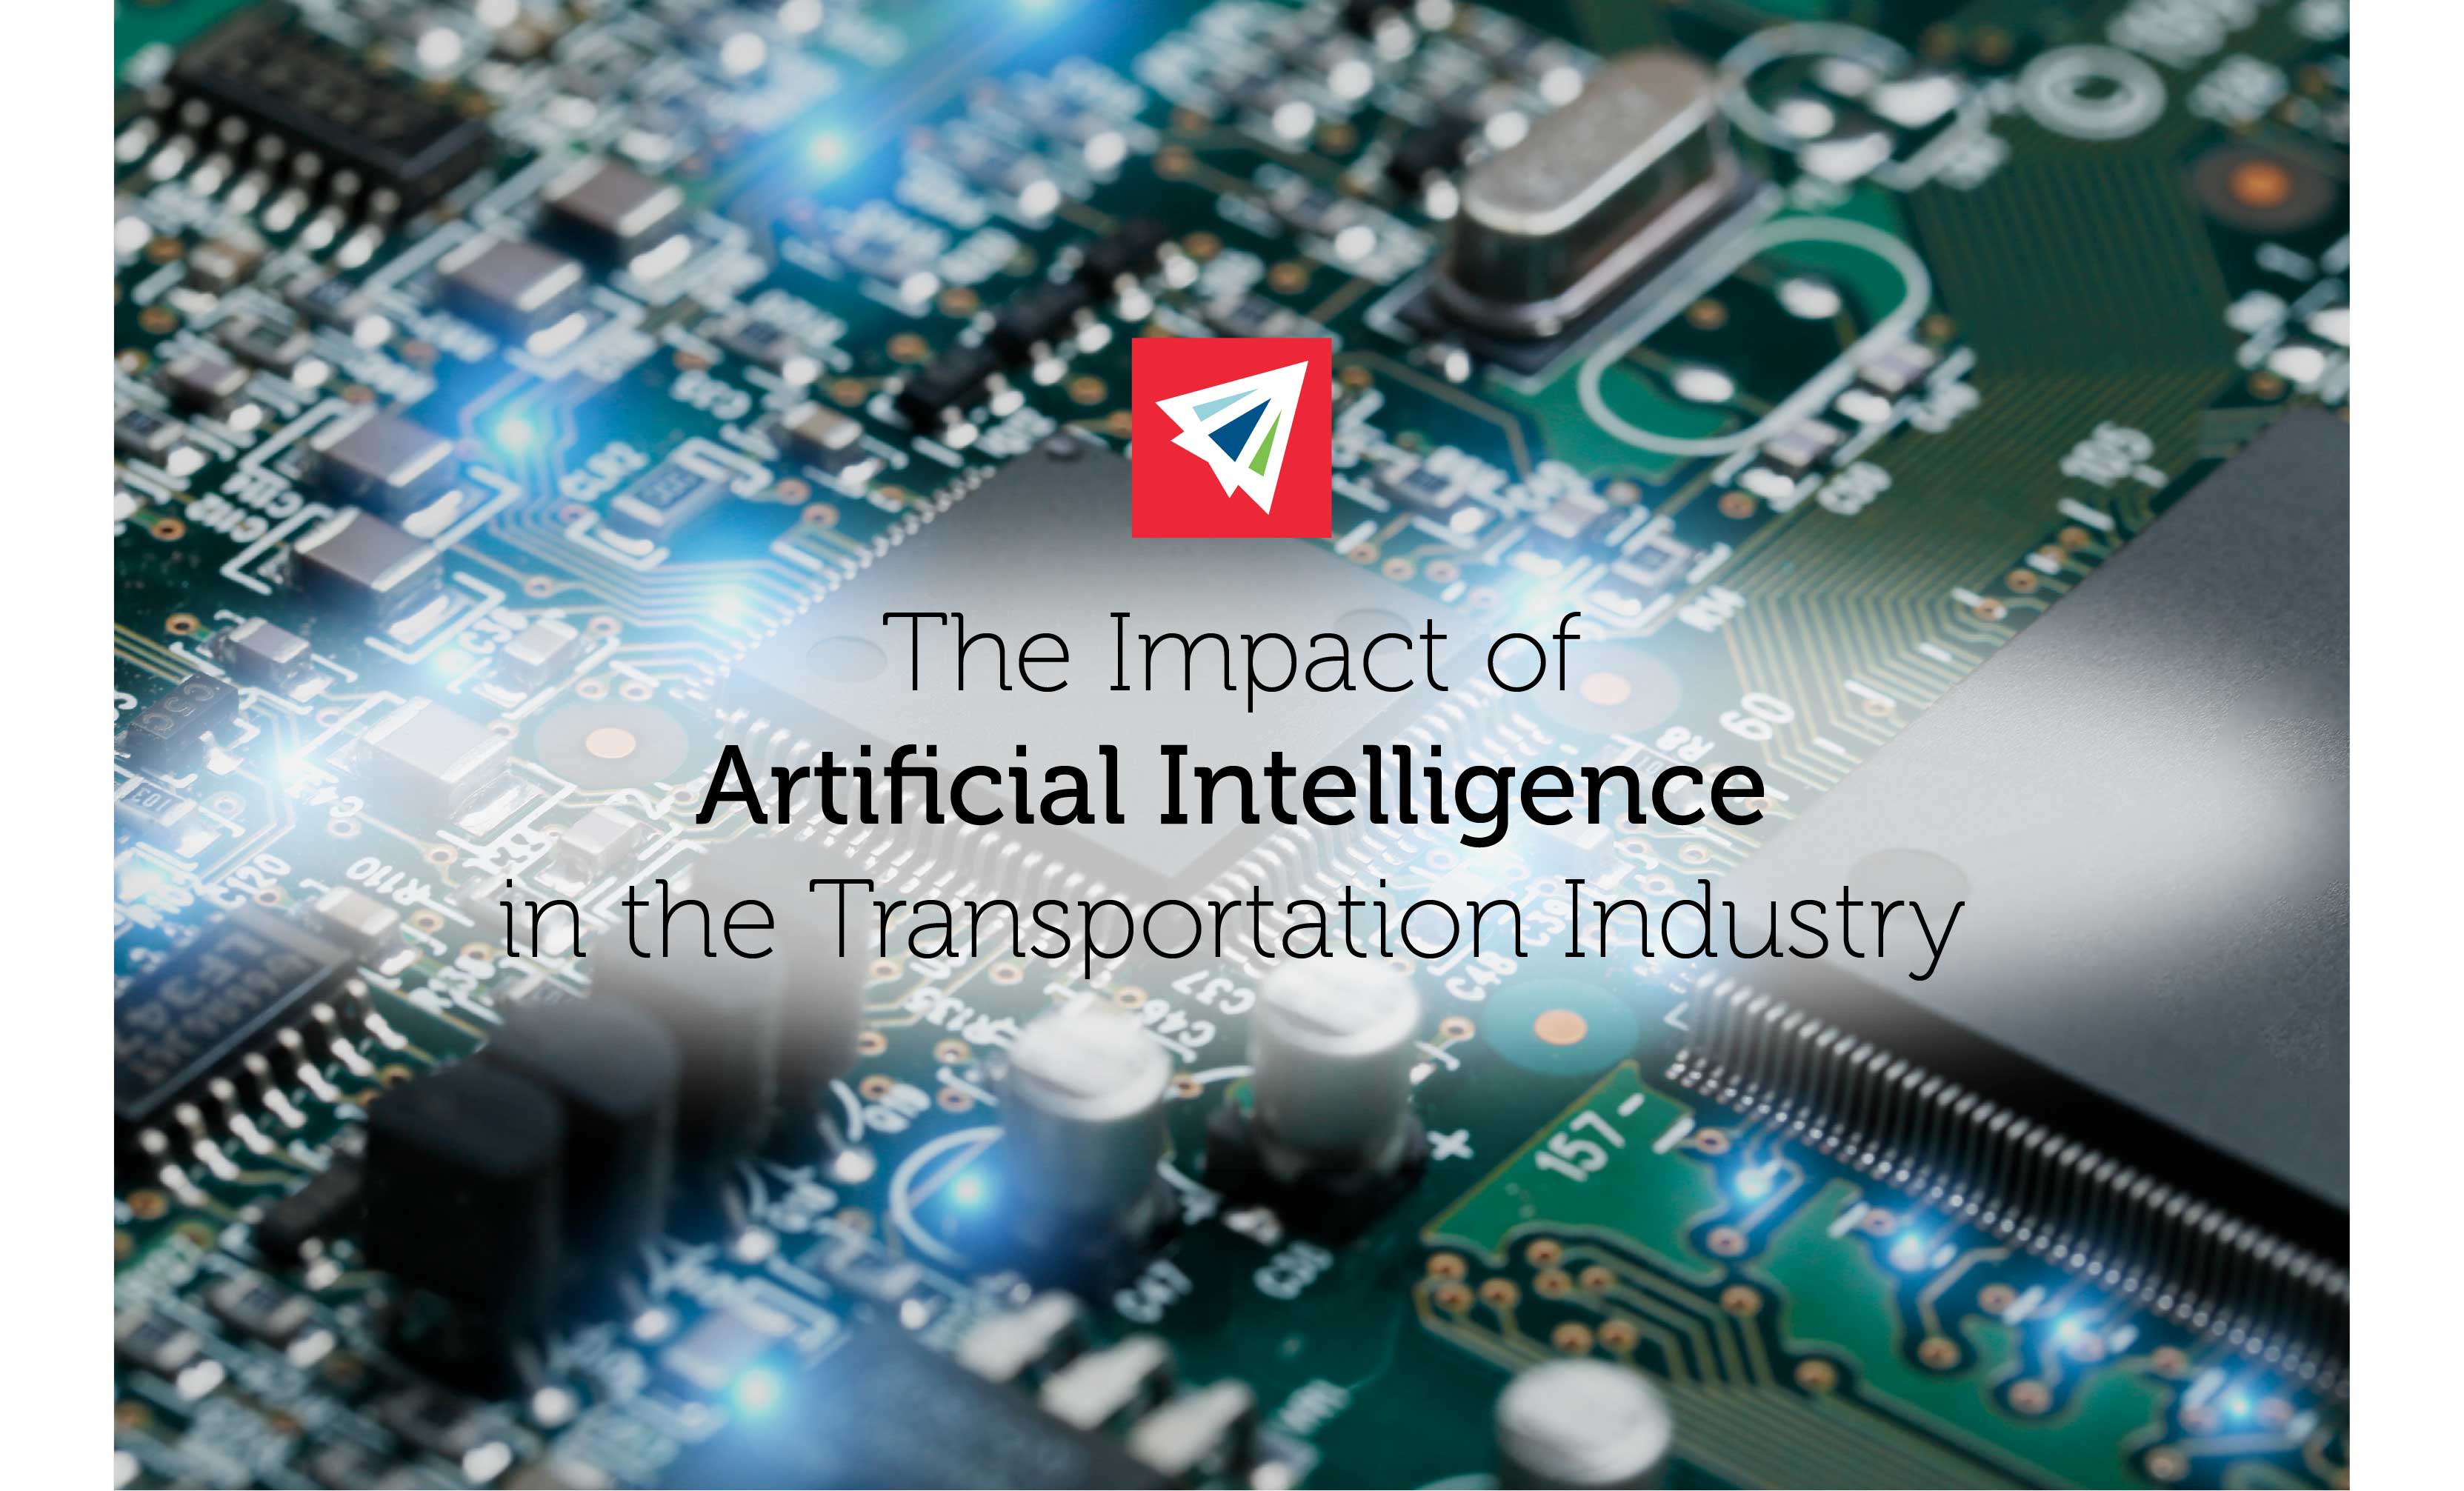 The Impact of Artificial Intelligence in Transportation - Land, Sea